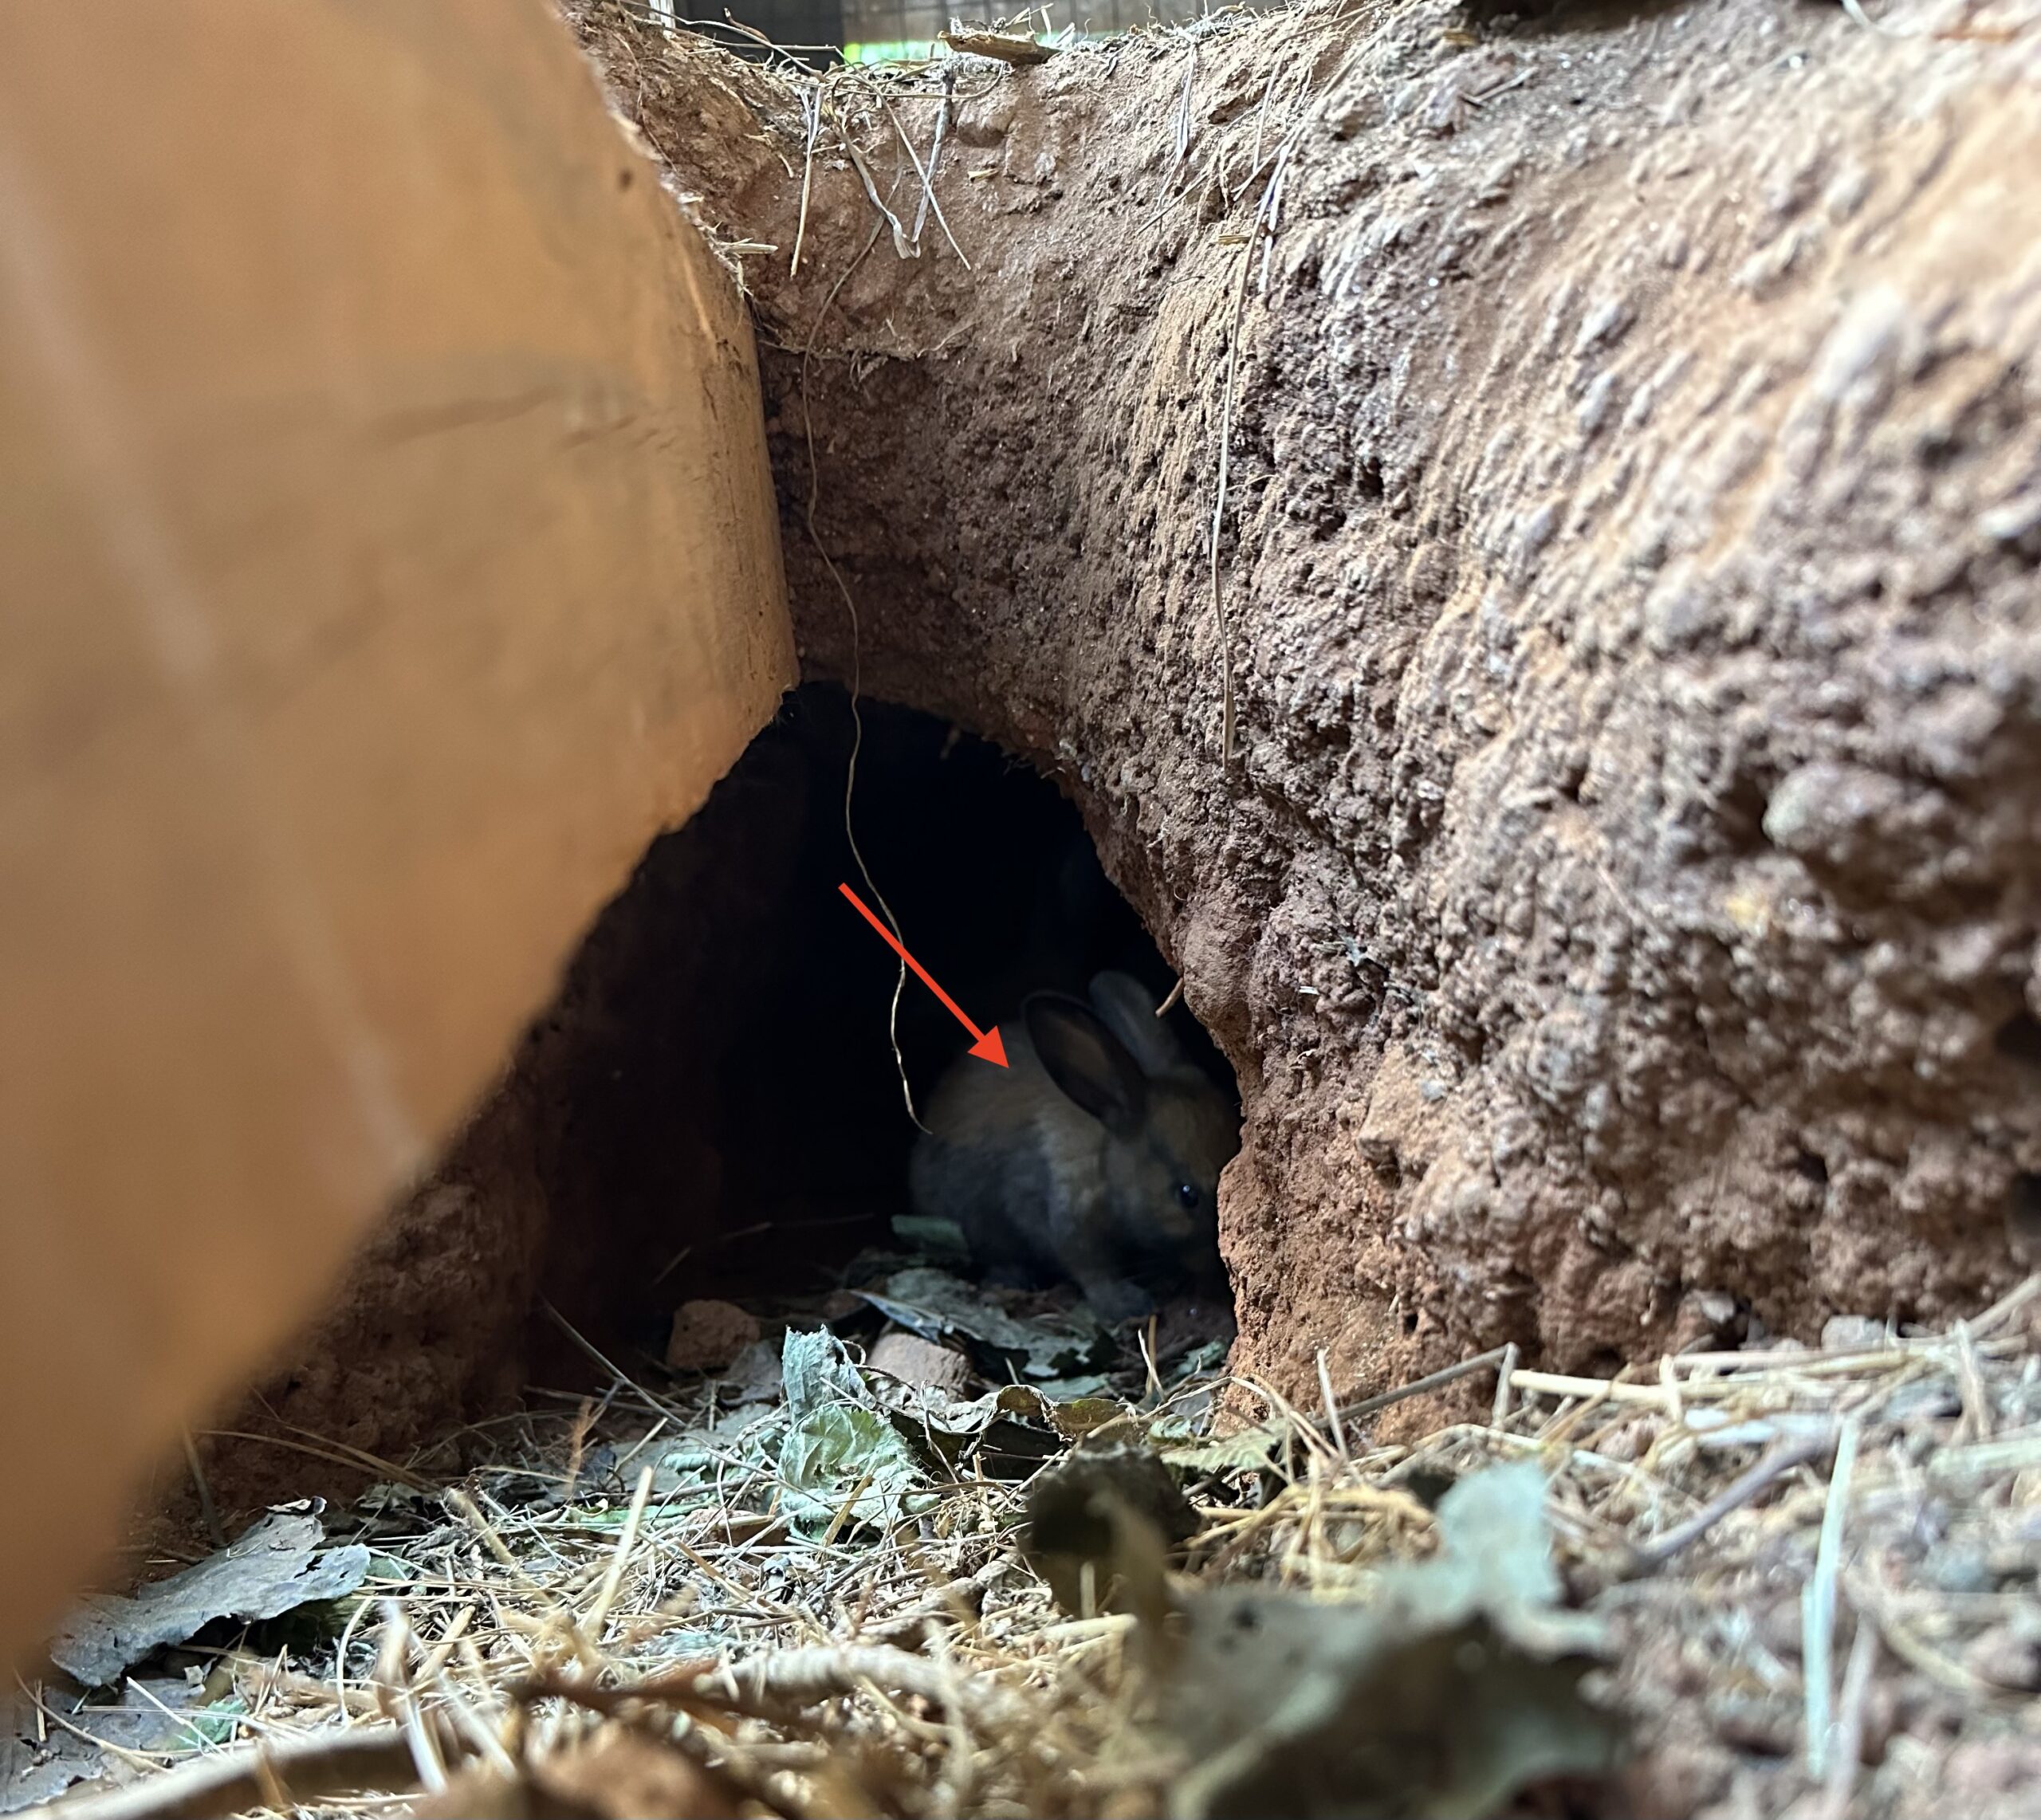 Allowing our rabbits to burrow supports their natural behavior.